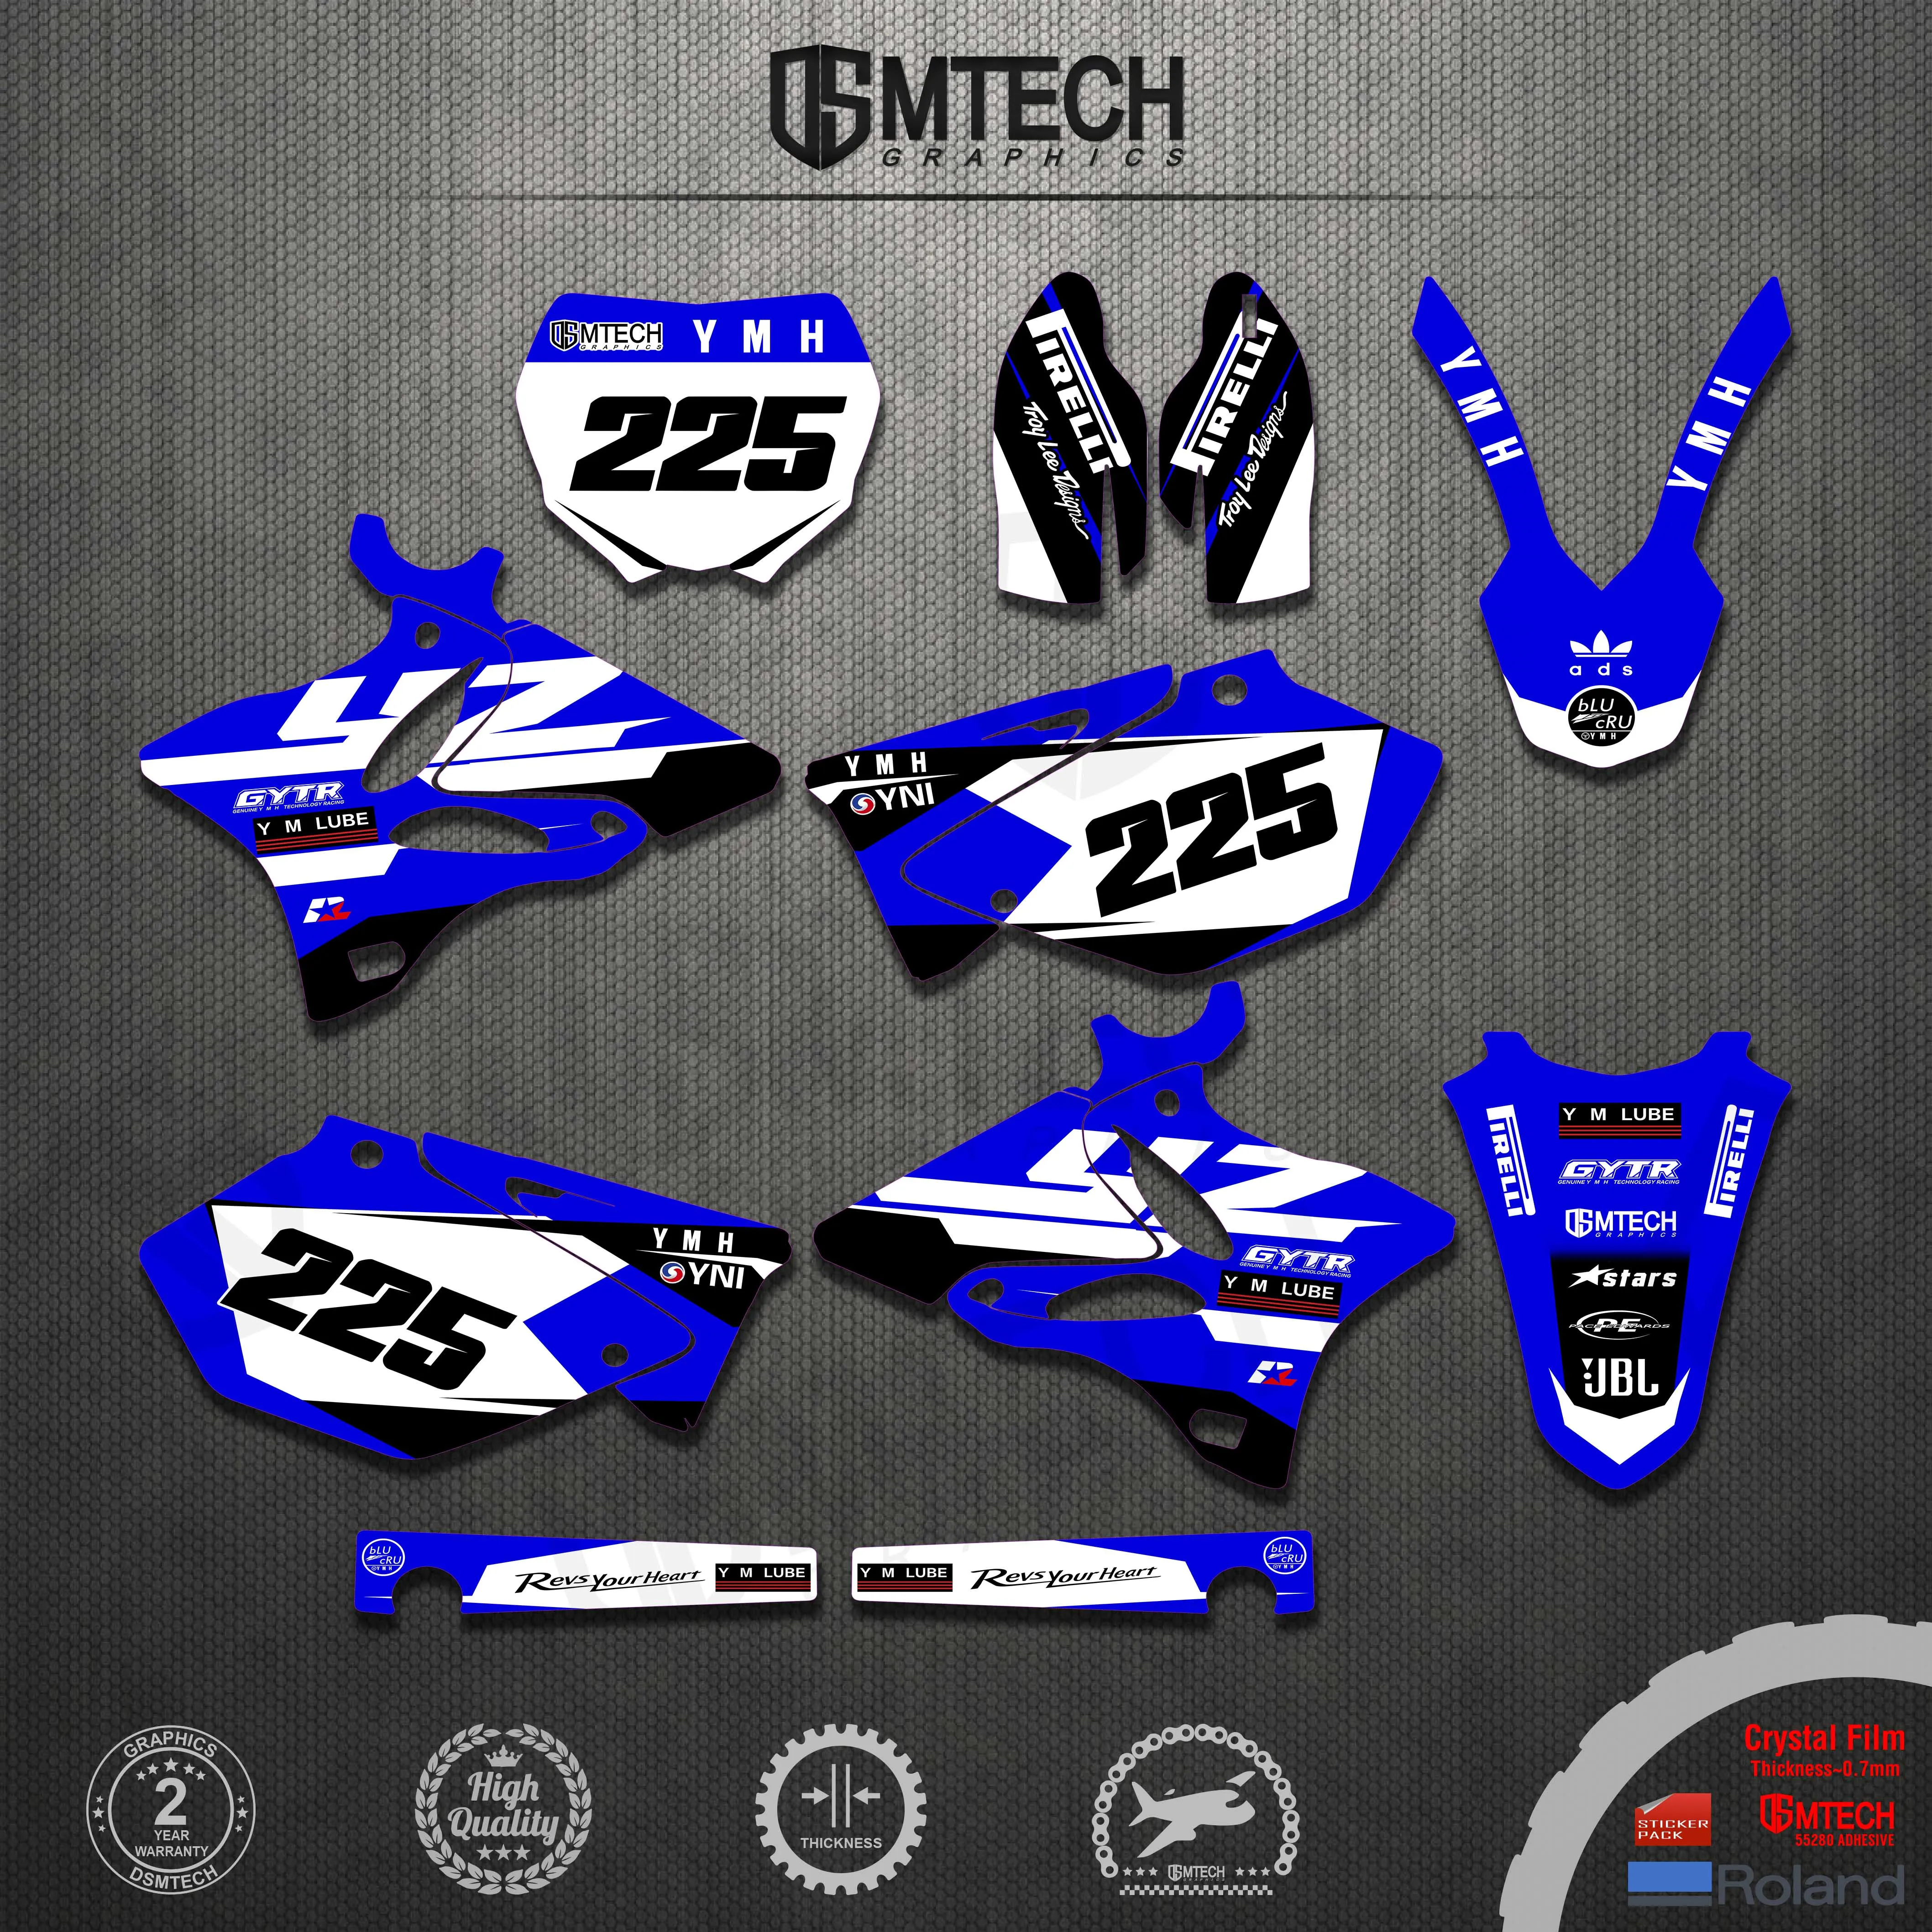 DSMTECH Stickers Decals Graphics kits For YAMAHA YZ125 YZ250 2002- 2005 2006 2007 2008 2009 2010 2011 2012 2013 2014 YZ 250 motocross graphics deco decal sticker kit fits for yamaha yz85 yz 85 2002 2014 2013 2012 2011 2010 2009 2008 2007 2006